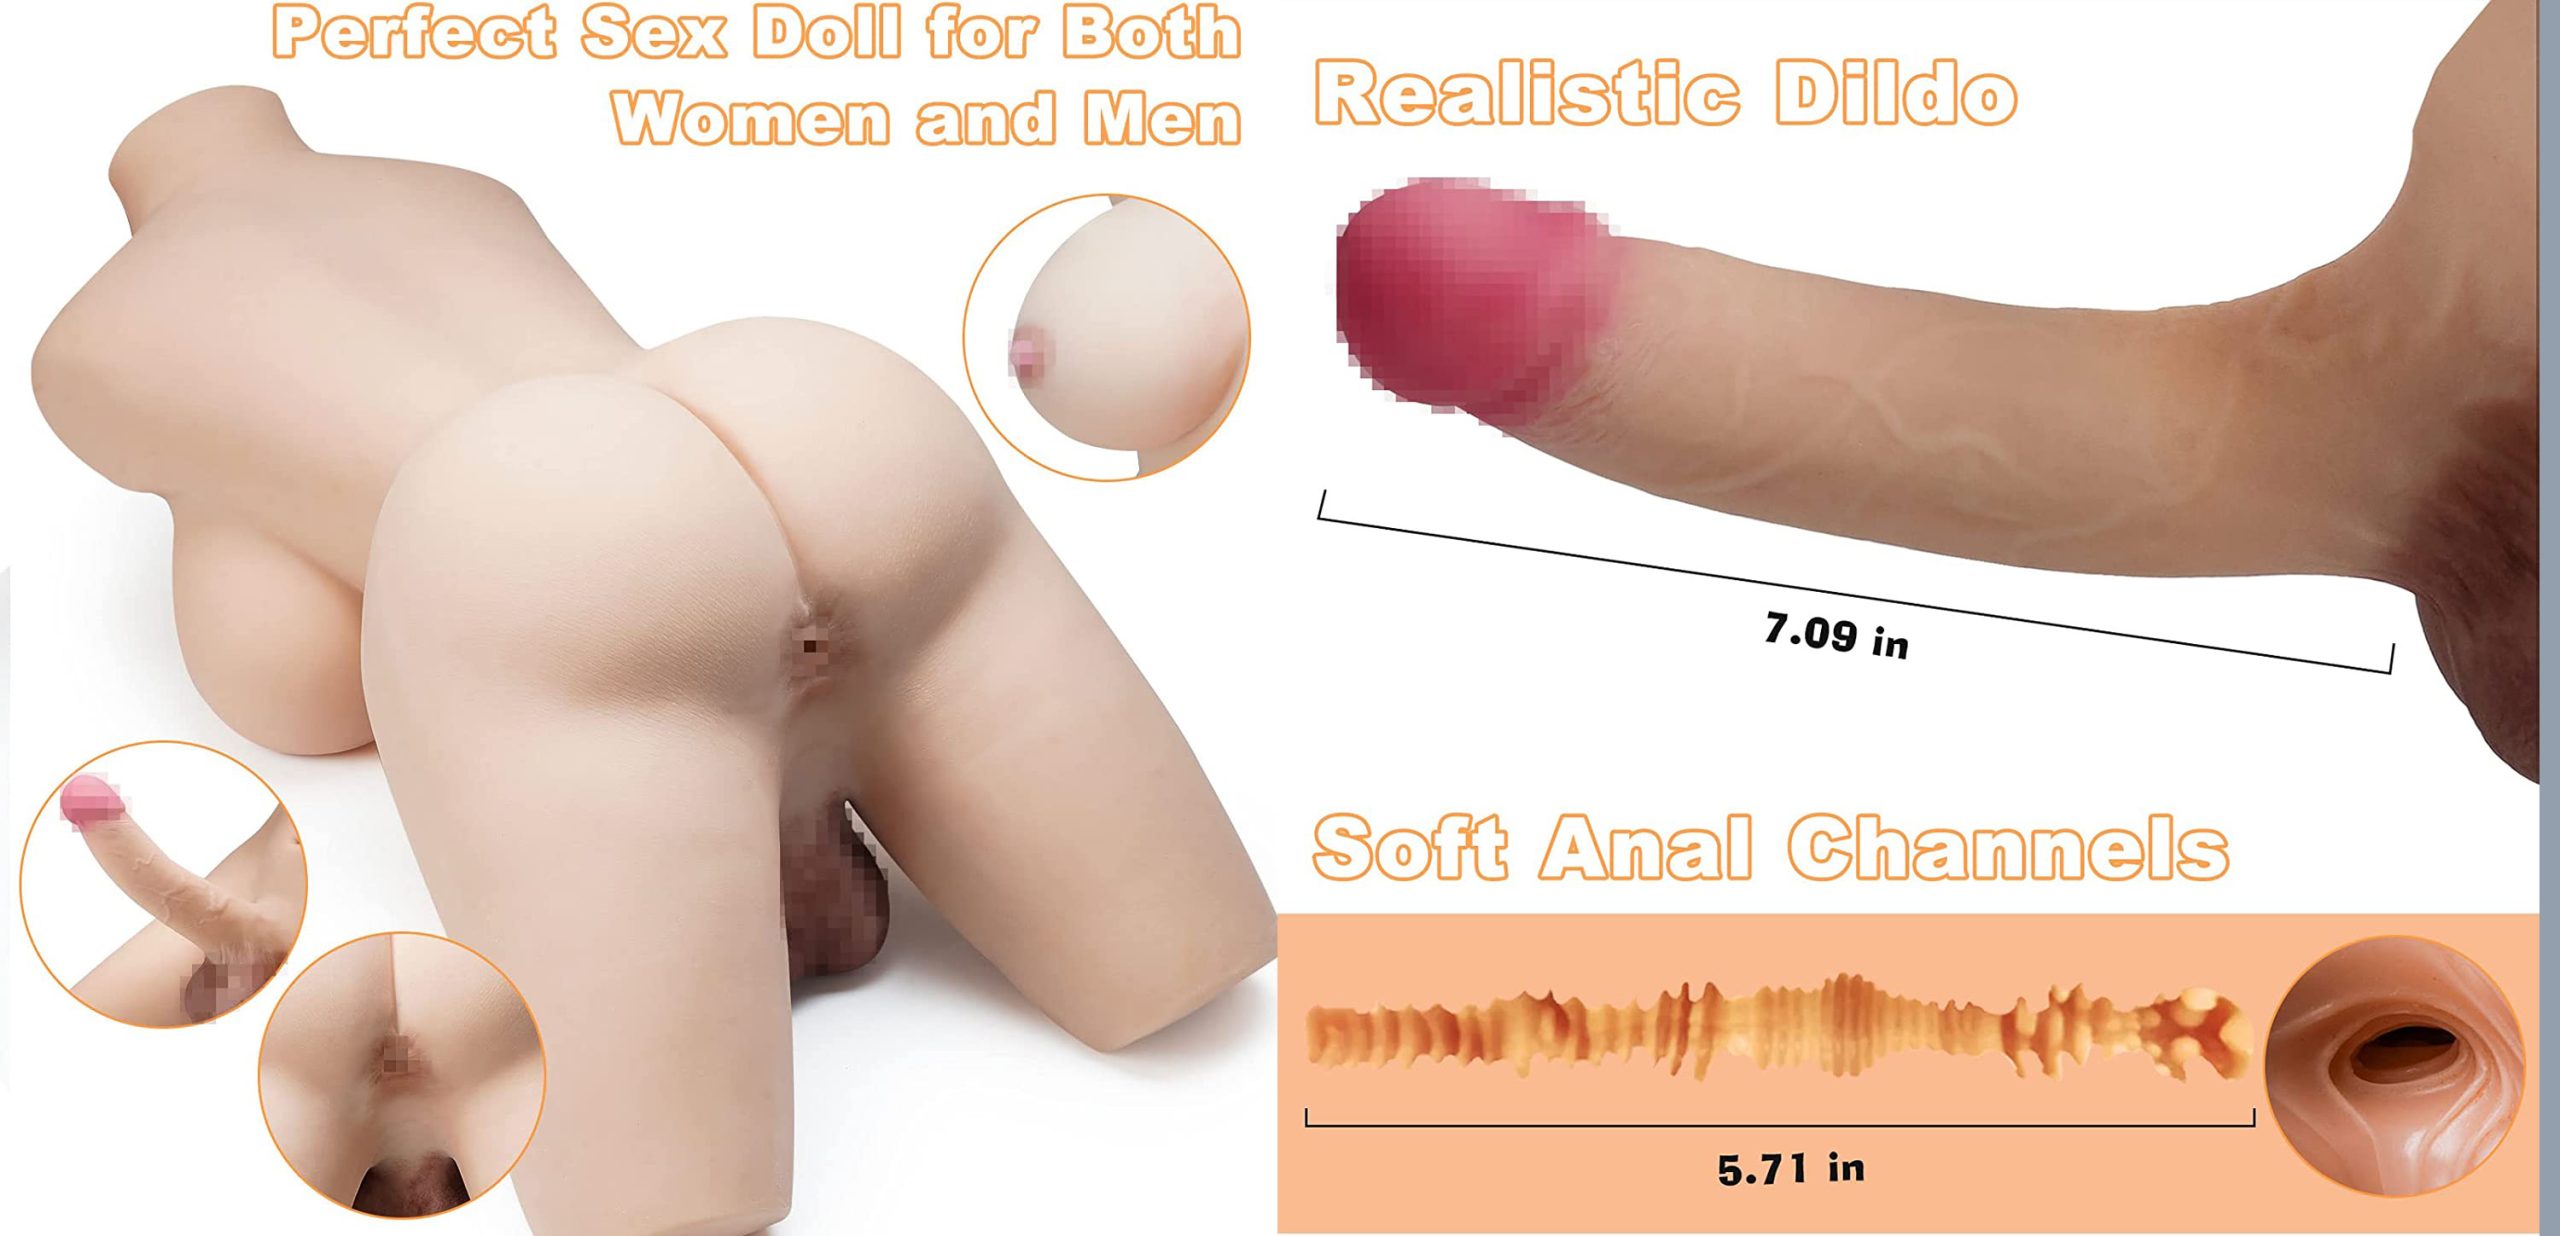 Shemale Sex Doll Lifelike Transsexual Love Dolls with 7 inch Penis Adult Pleasure by TANTALY 19.8LB
